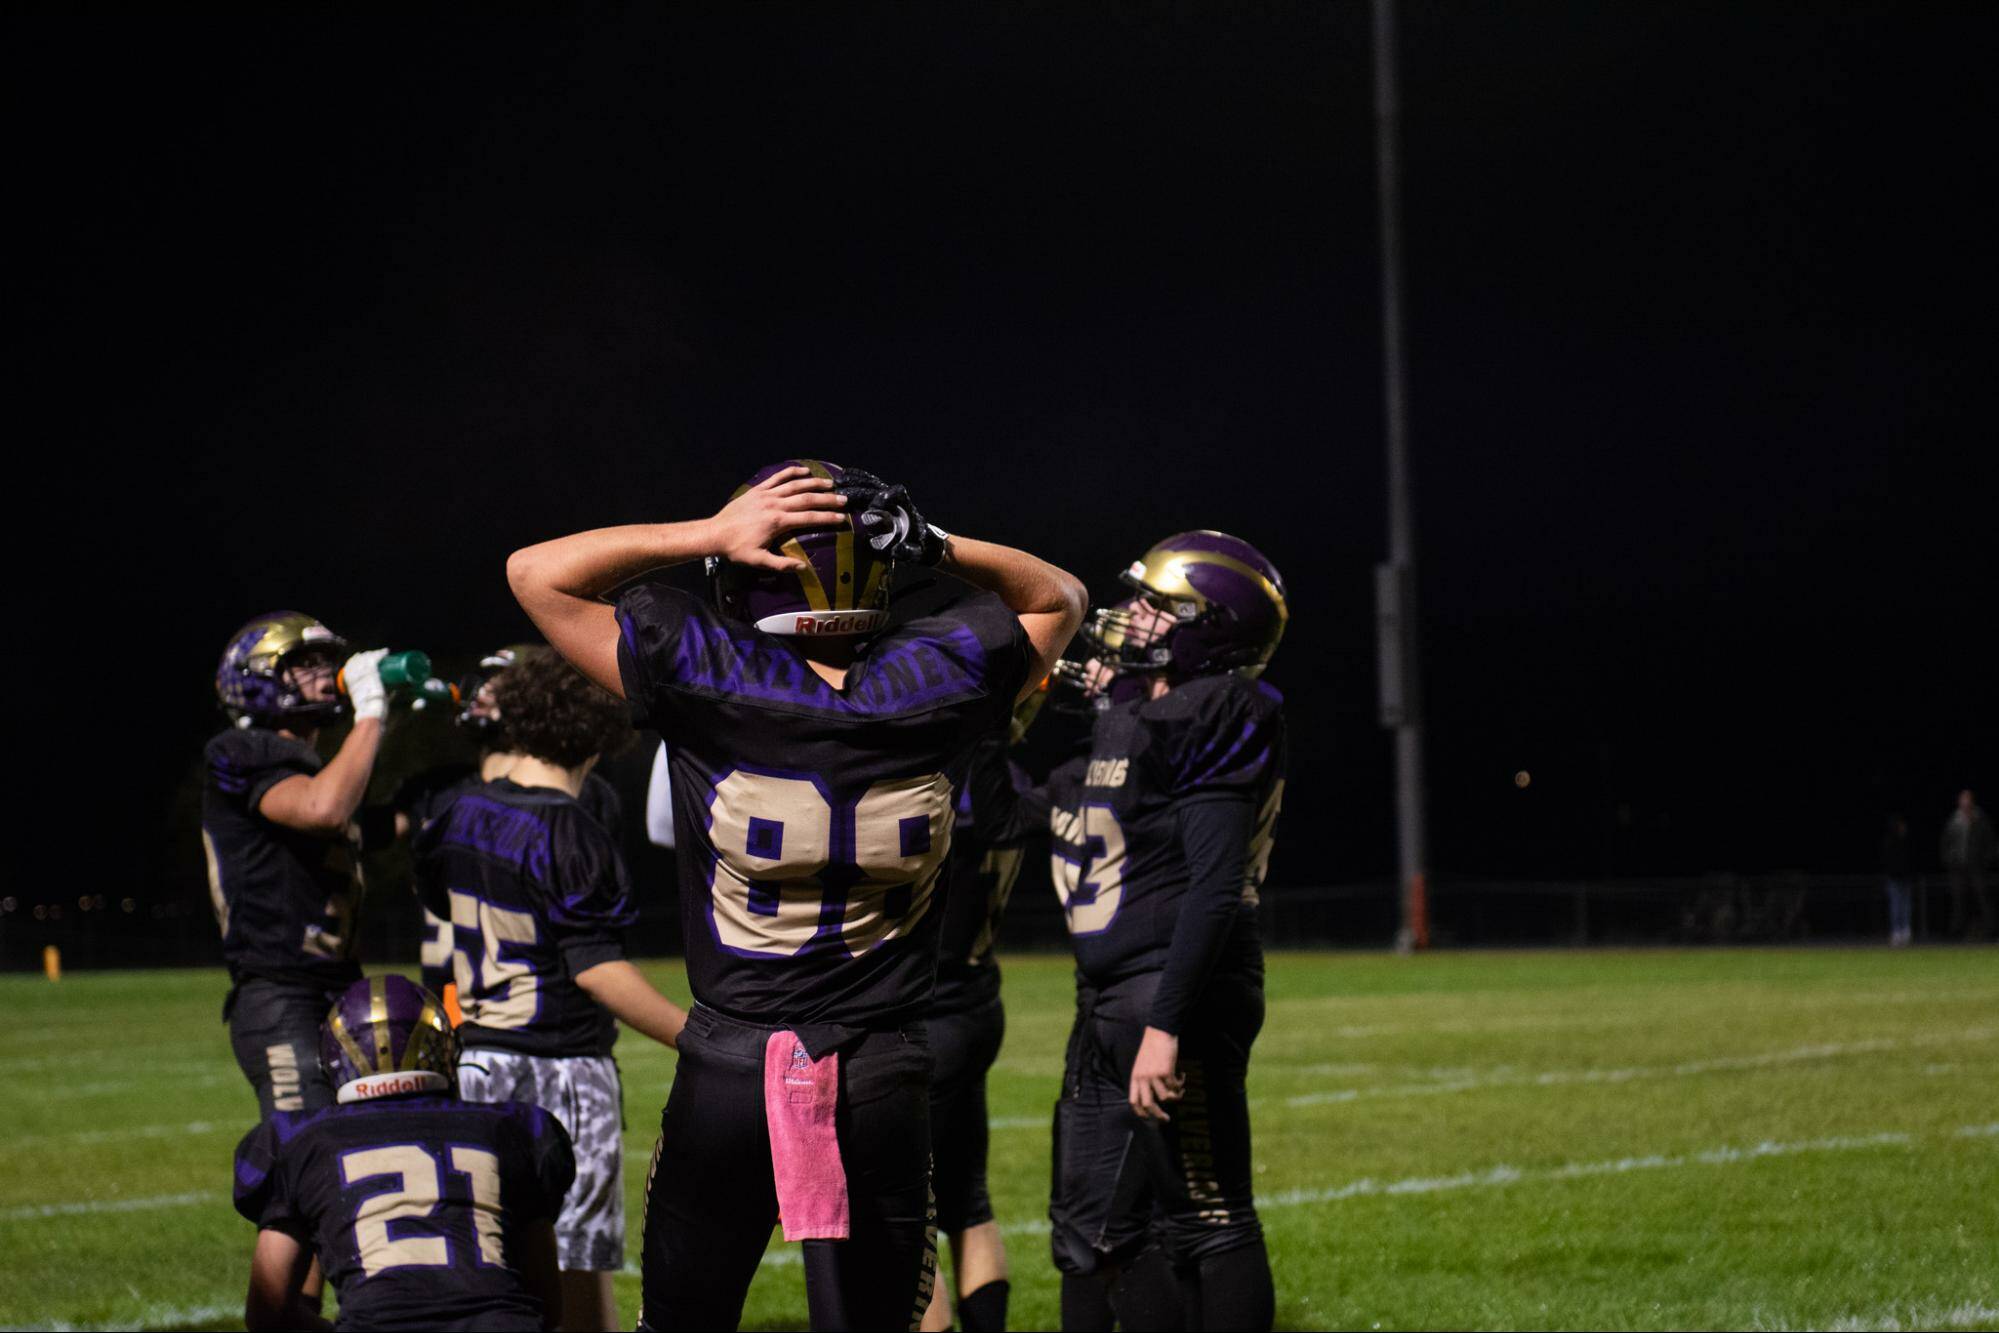 Contributed photo by Kathryn Wheeler
The team expresses frustration at another Coupeville touchdown